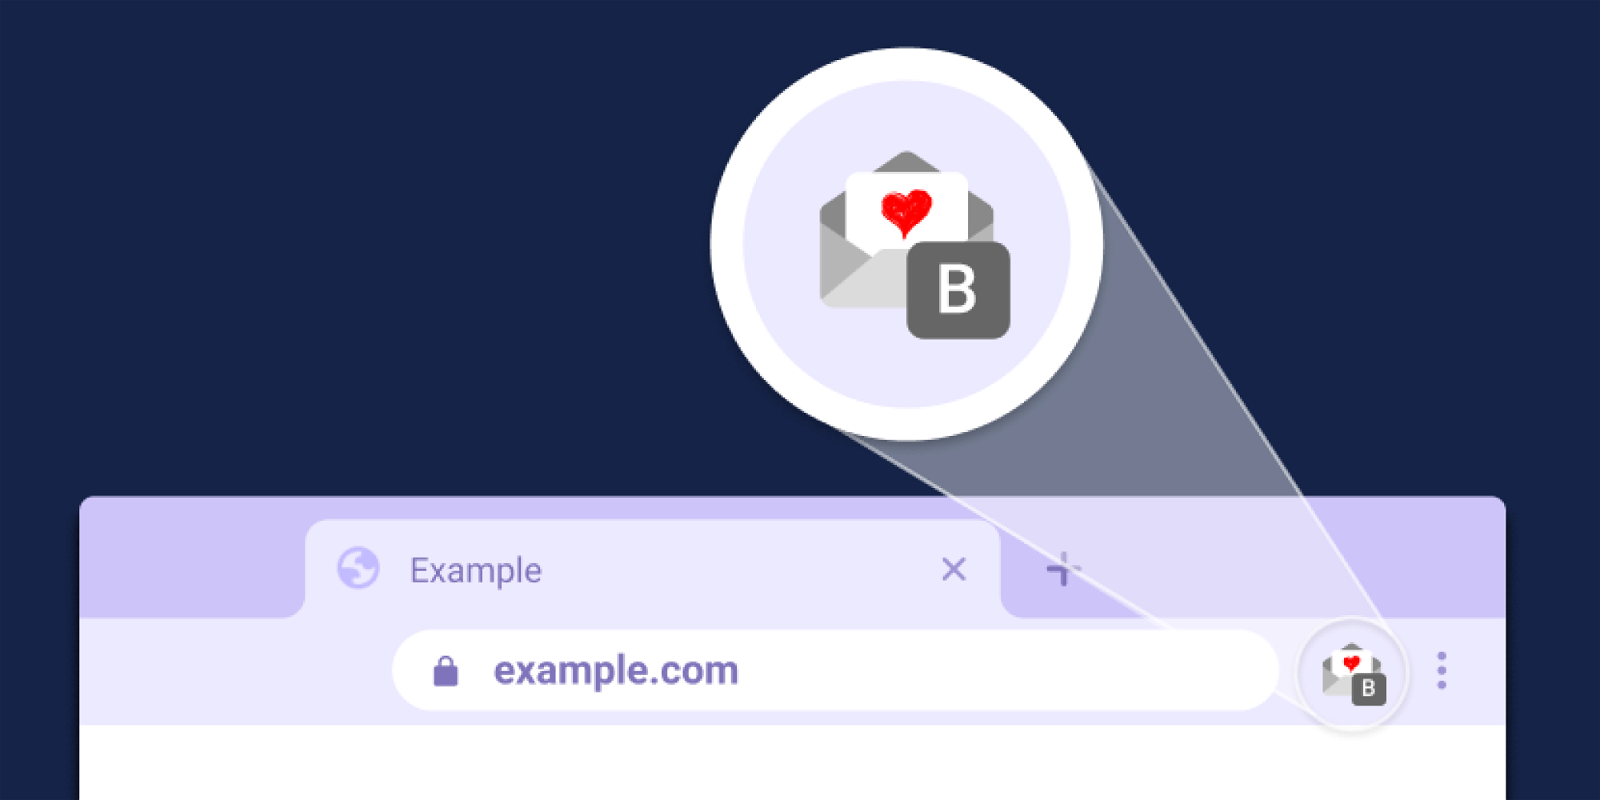 Introducing our new browser extension for scoring mailing lists - Subscription Score